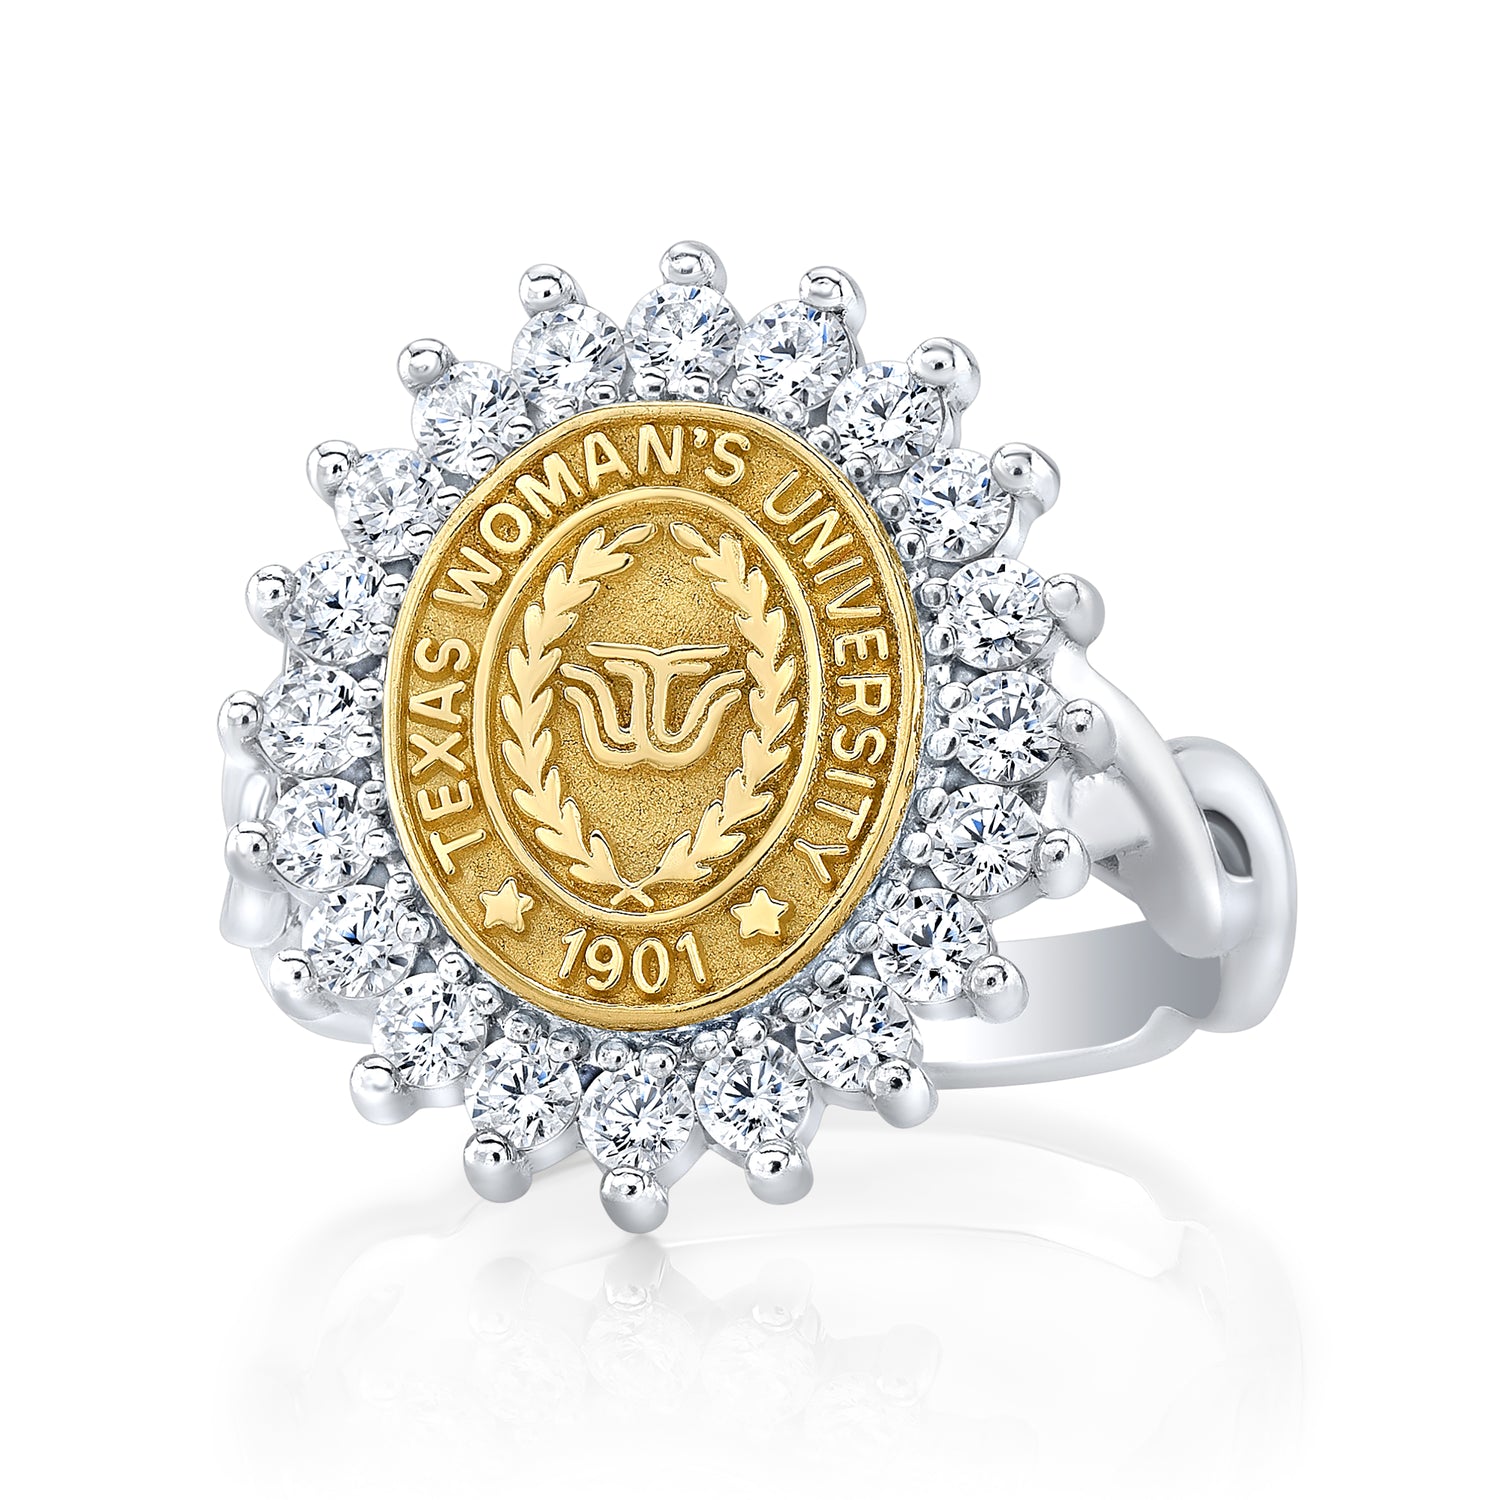 The Tradition 123 University Ring in two tone 14K Gold.